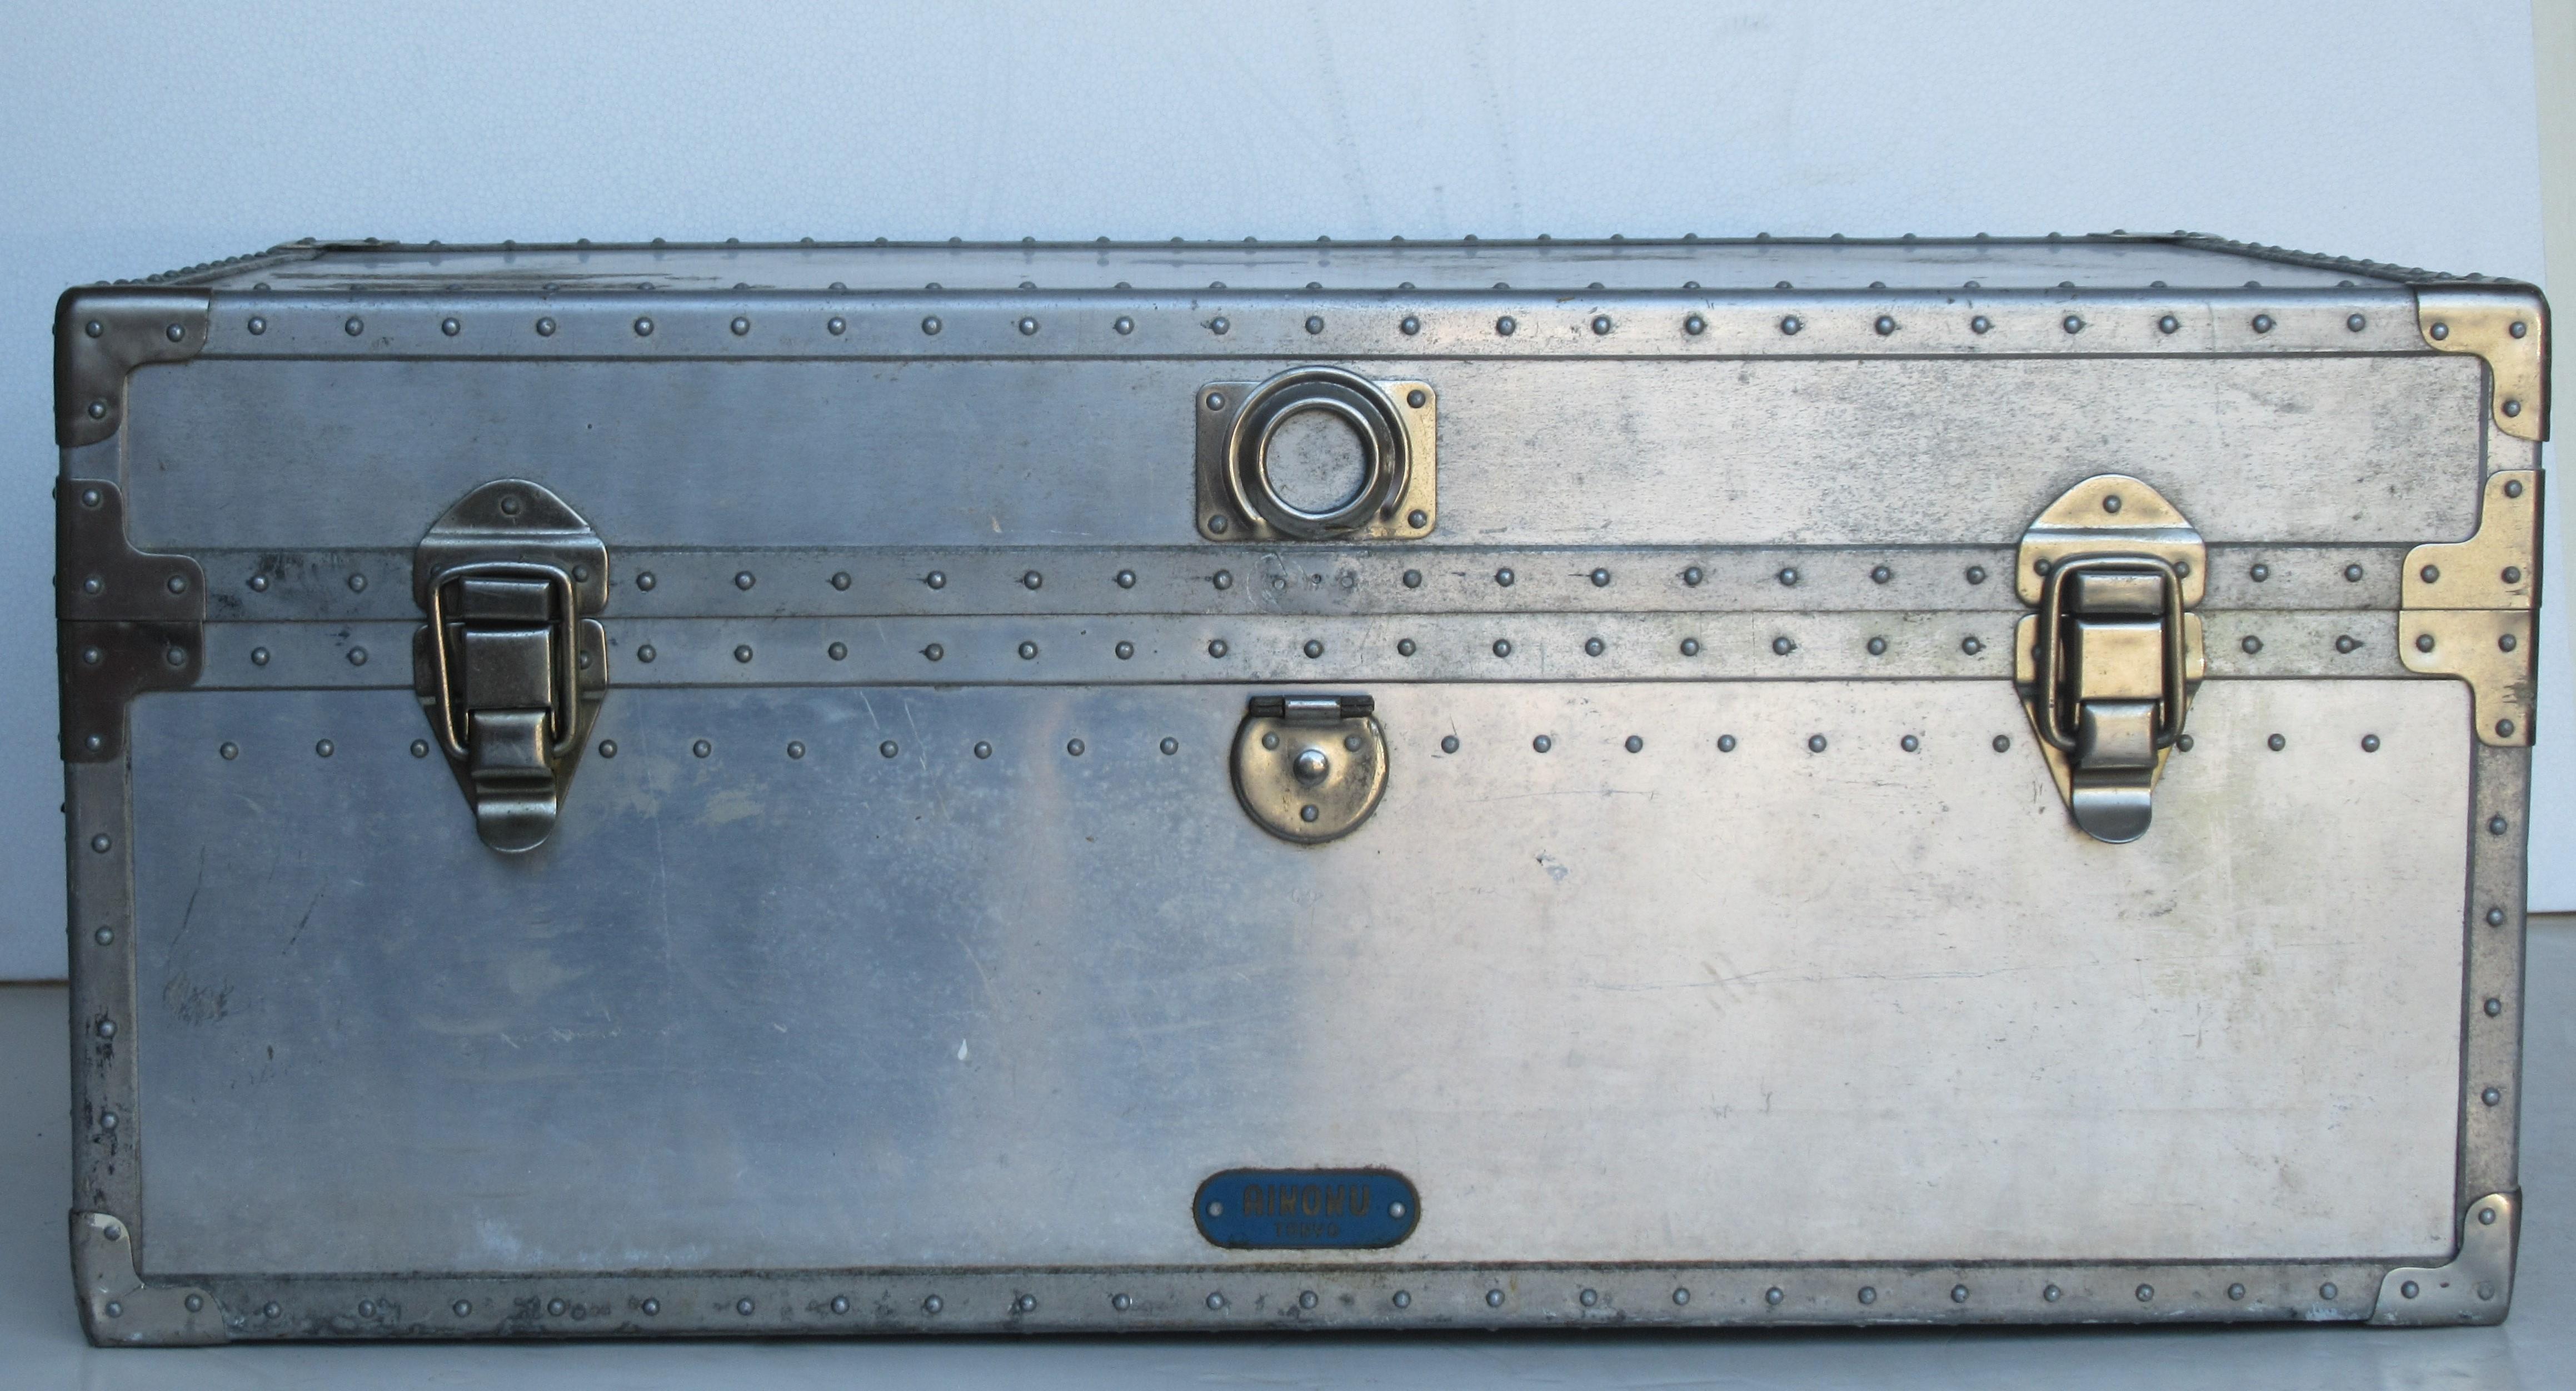 Industrial riveted aluminum trunk with leather handles in all original nicely aged color patina. Raised blue metal plate at front center bottom says Aikoku - Tokyo - circa 1940s. See all pictures.